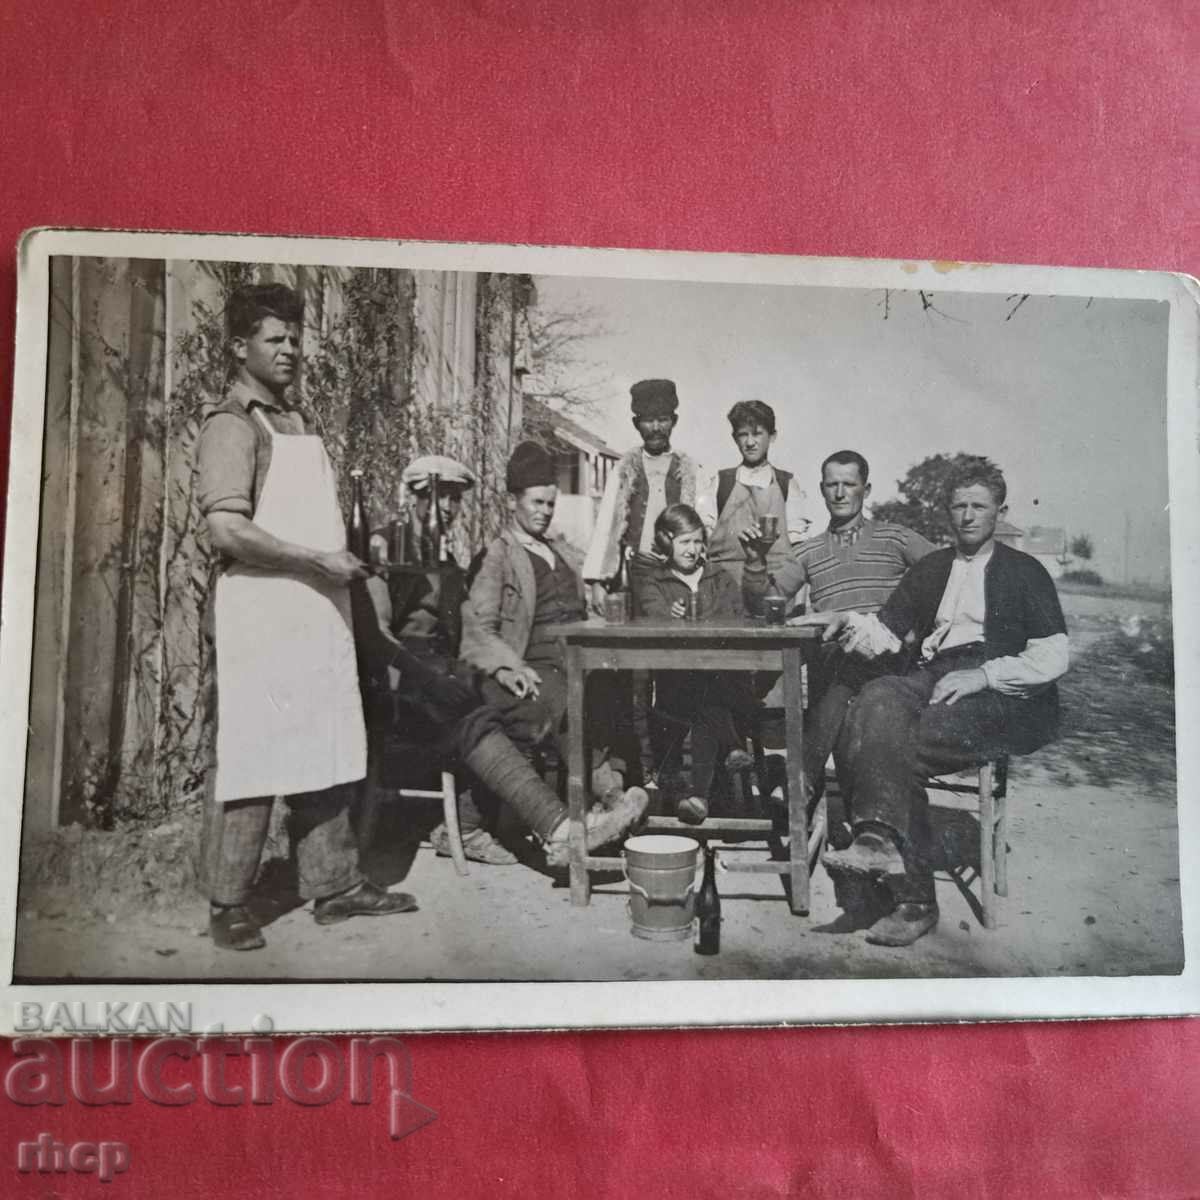 Kingdom of Bulgaria - in the village pub, an old photo from the 1930s